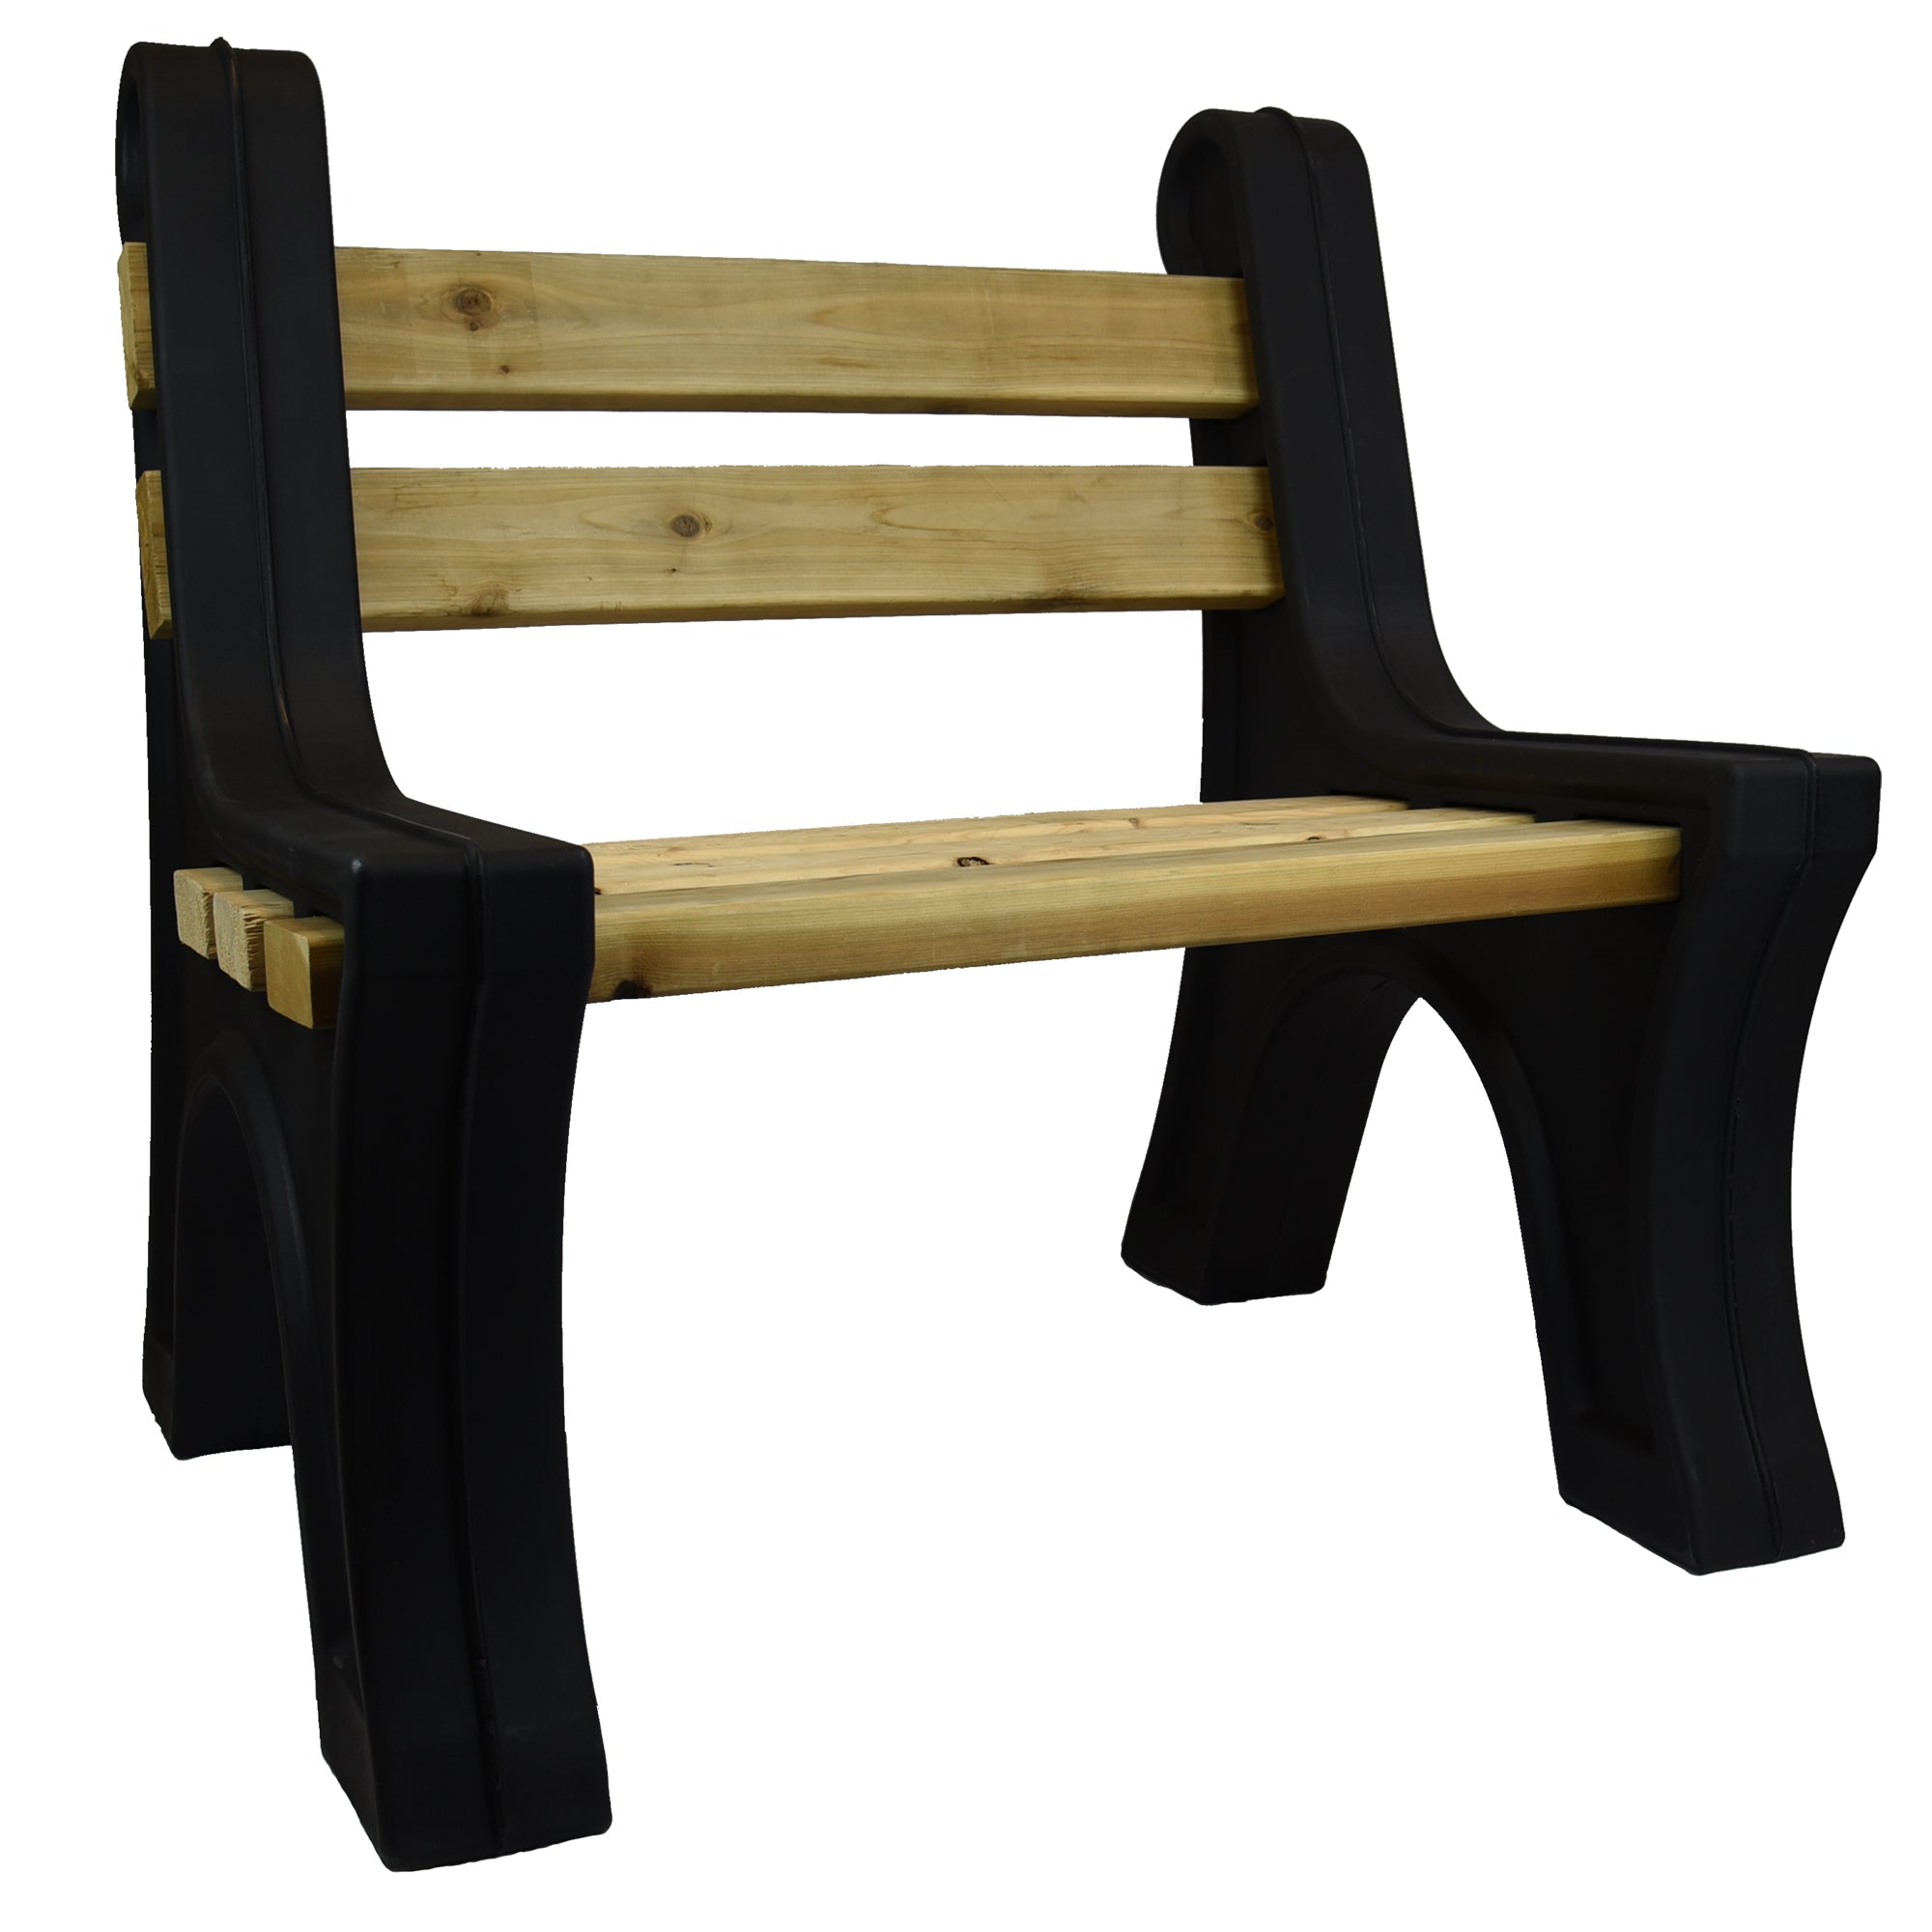 Modern Bench Ends With Backrest